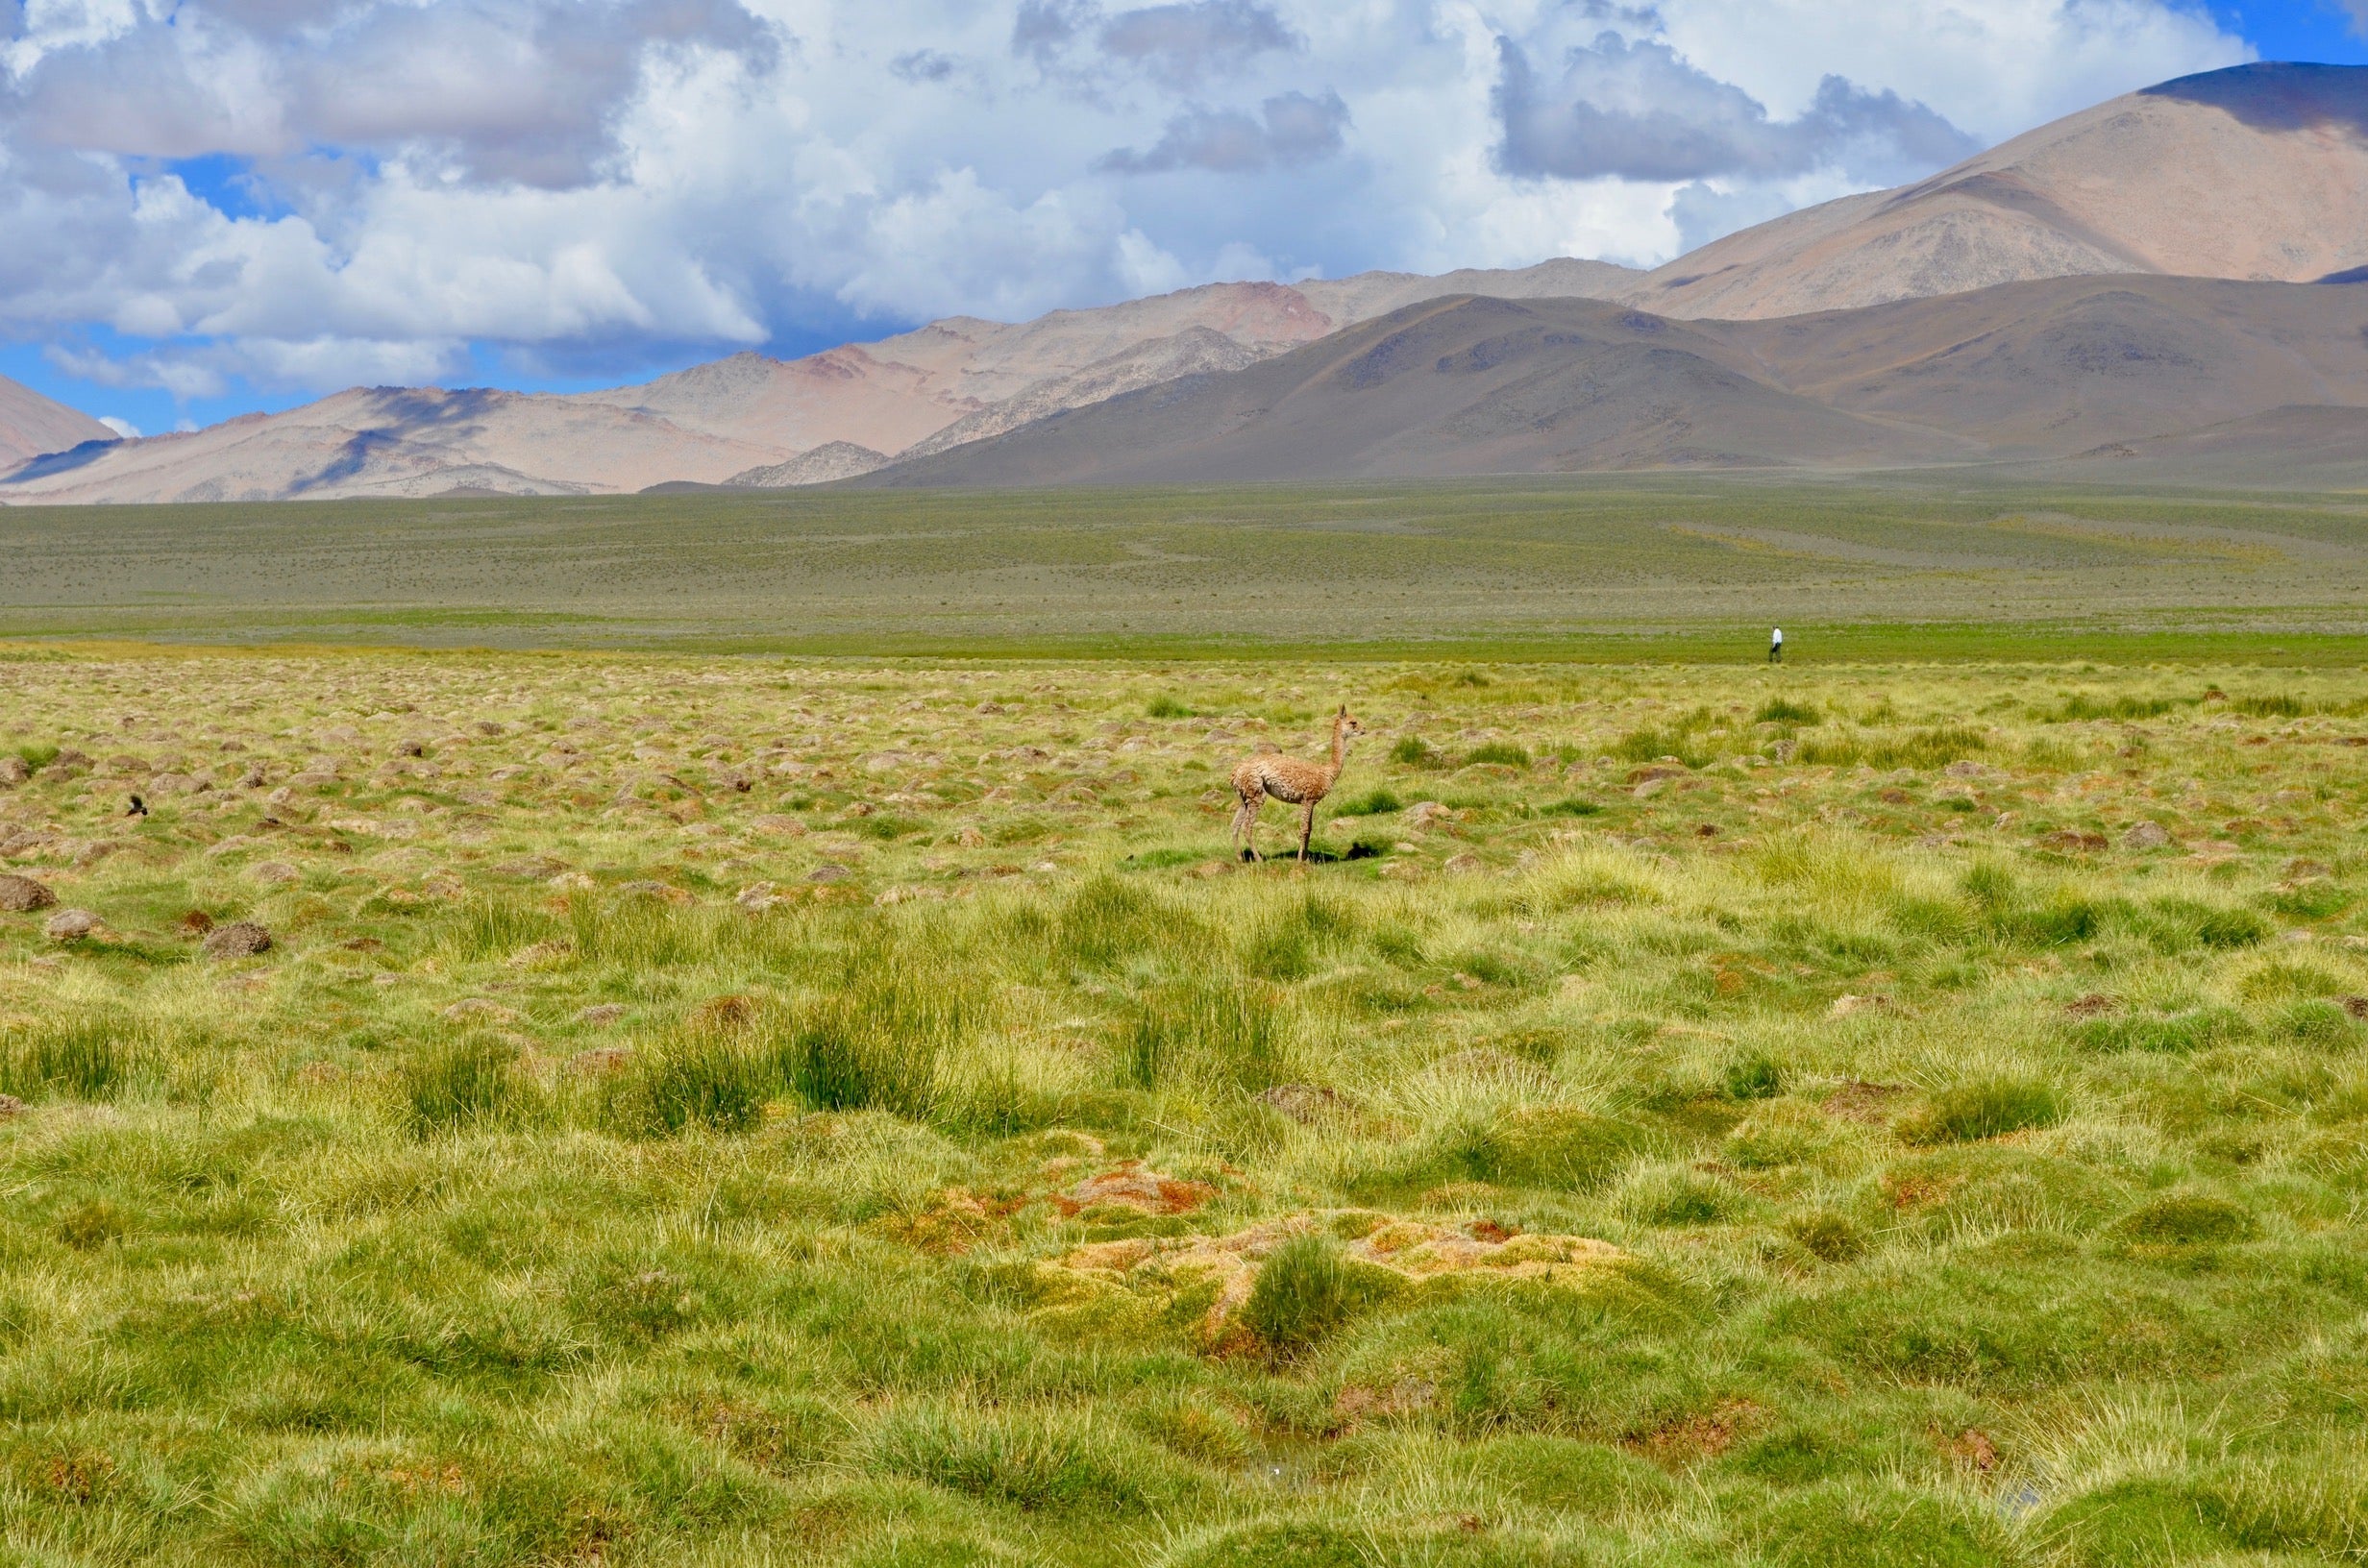 A lone vicuna stands amid the grasslands in Argentina's San Guillermo National Park following a mange epidemic.